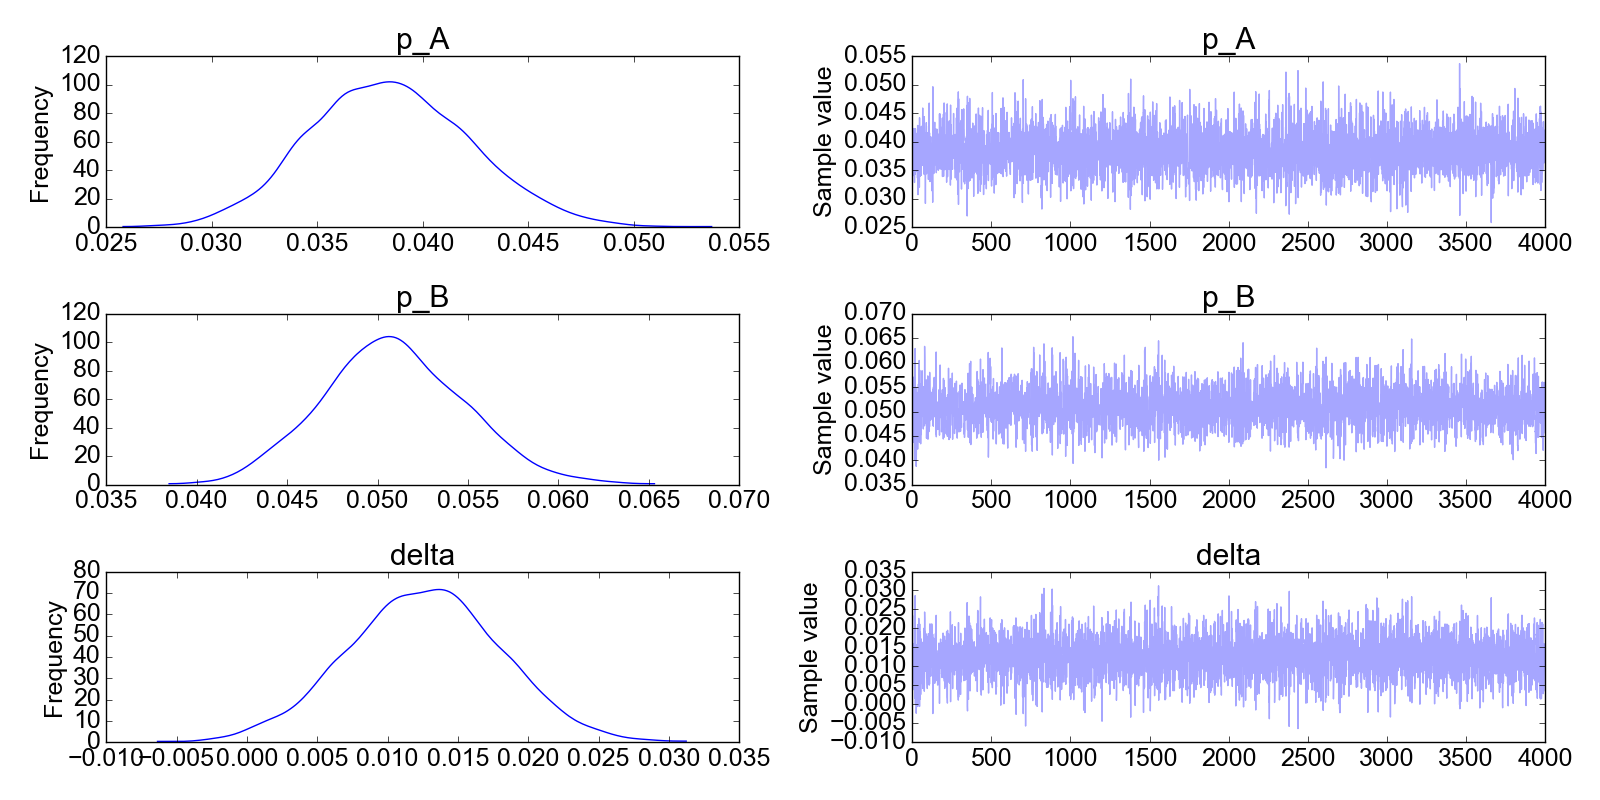 Figure. Trace plots from pyMC3, showing the posterior distributions for $p_A, p_B$ and $\Delta$.